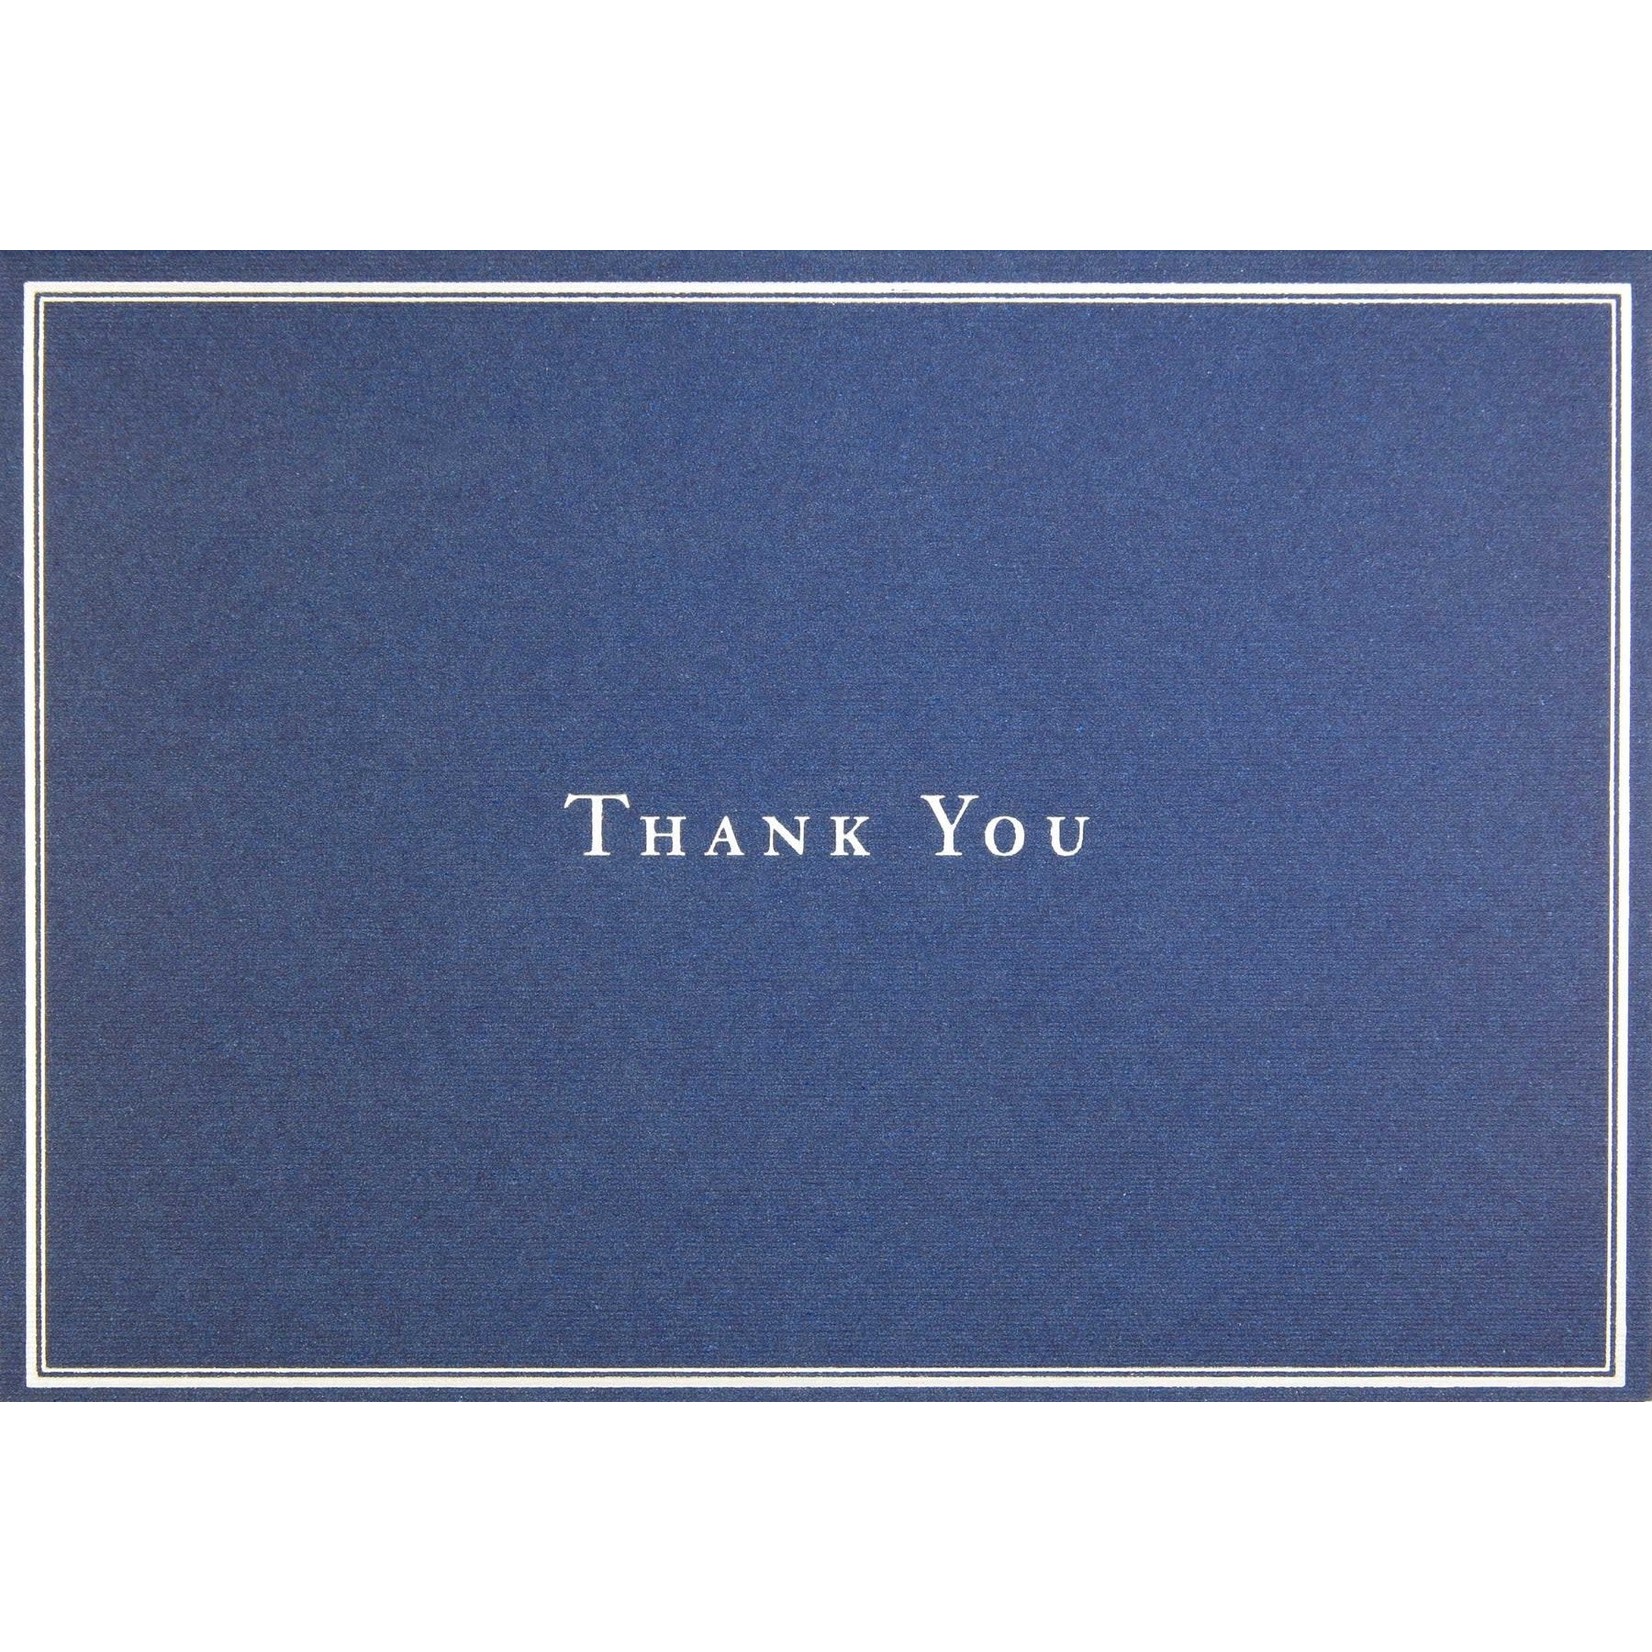 Peter Pauper Press Boxed Thank You Notes: Navy Blue